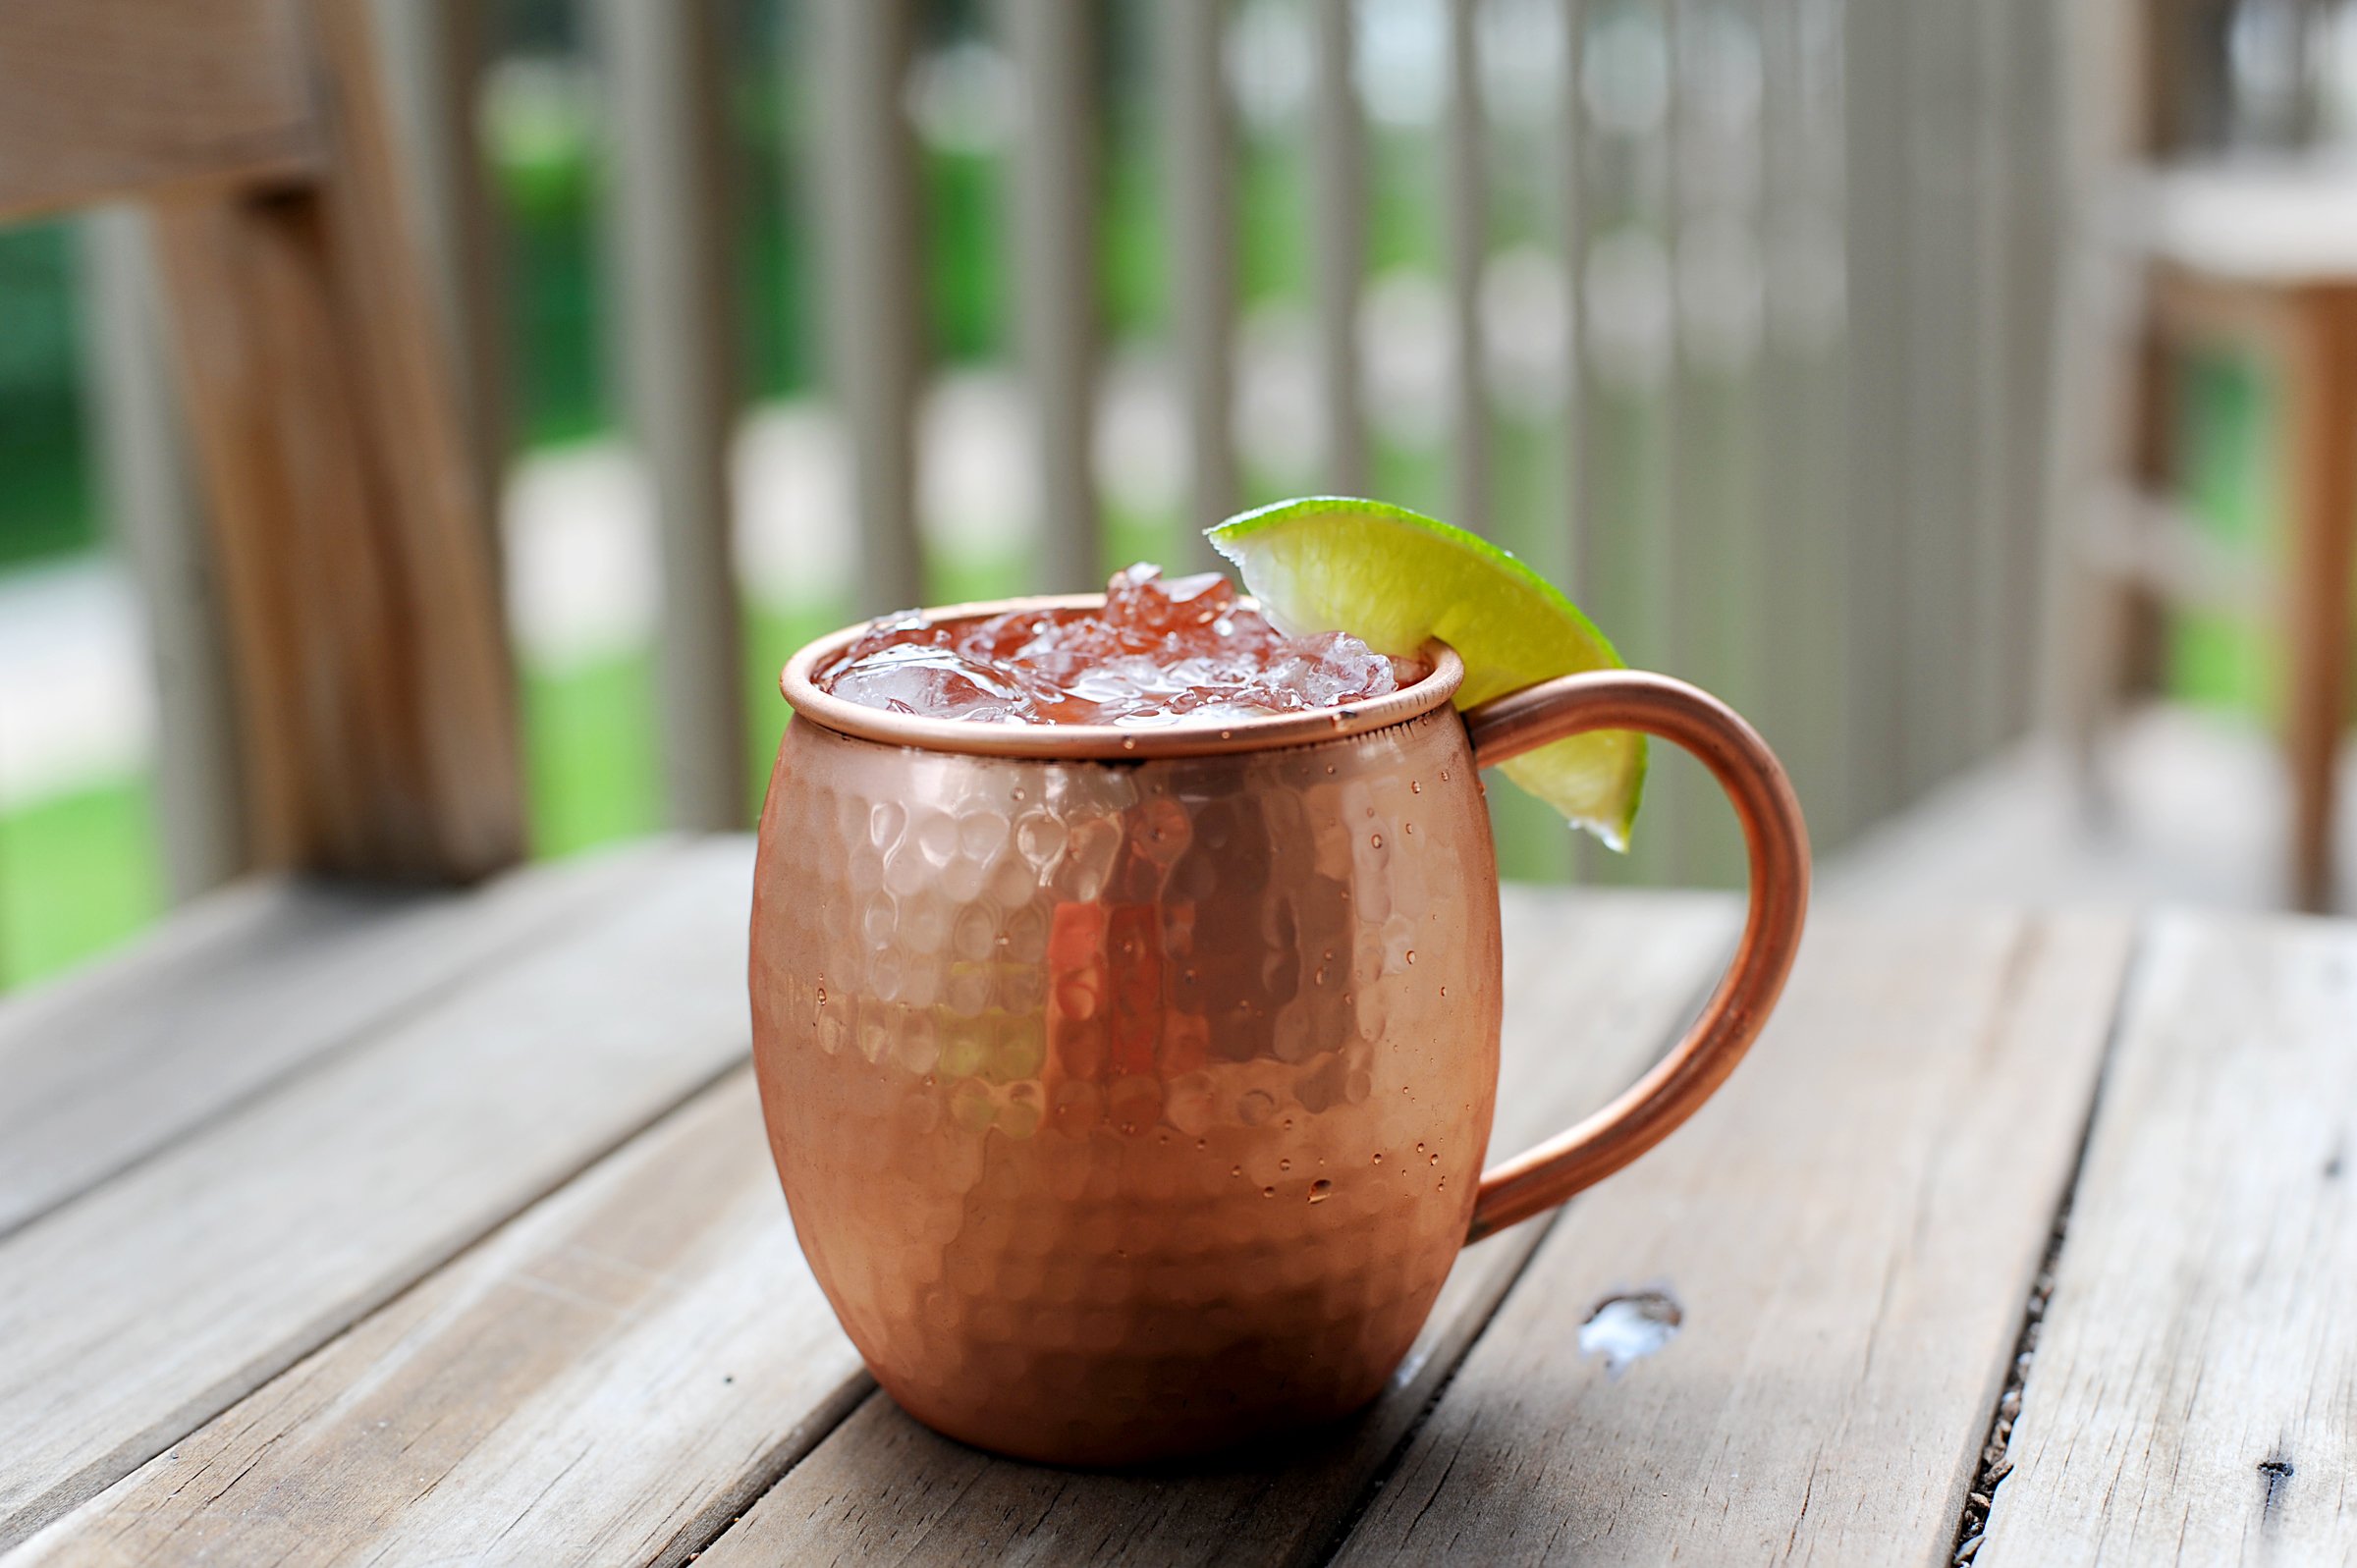 Alchemade Copper Barrel Mug for Moscow Mules - 16 oz - 100% Pure Hammered Copper - Heavy Gauge - No lining - includes FREE E-Recipe book